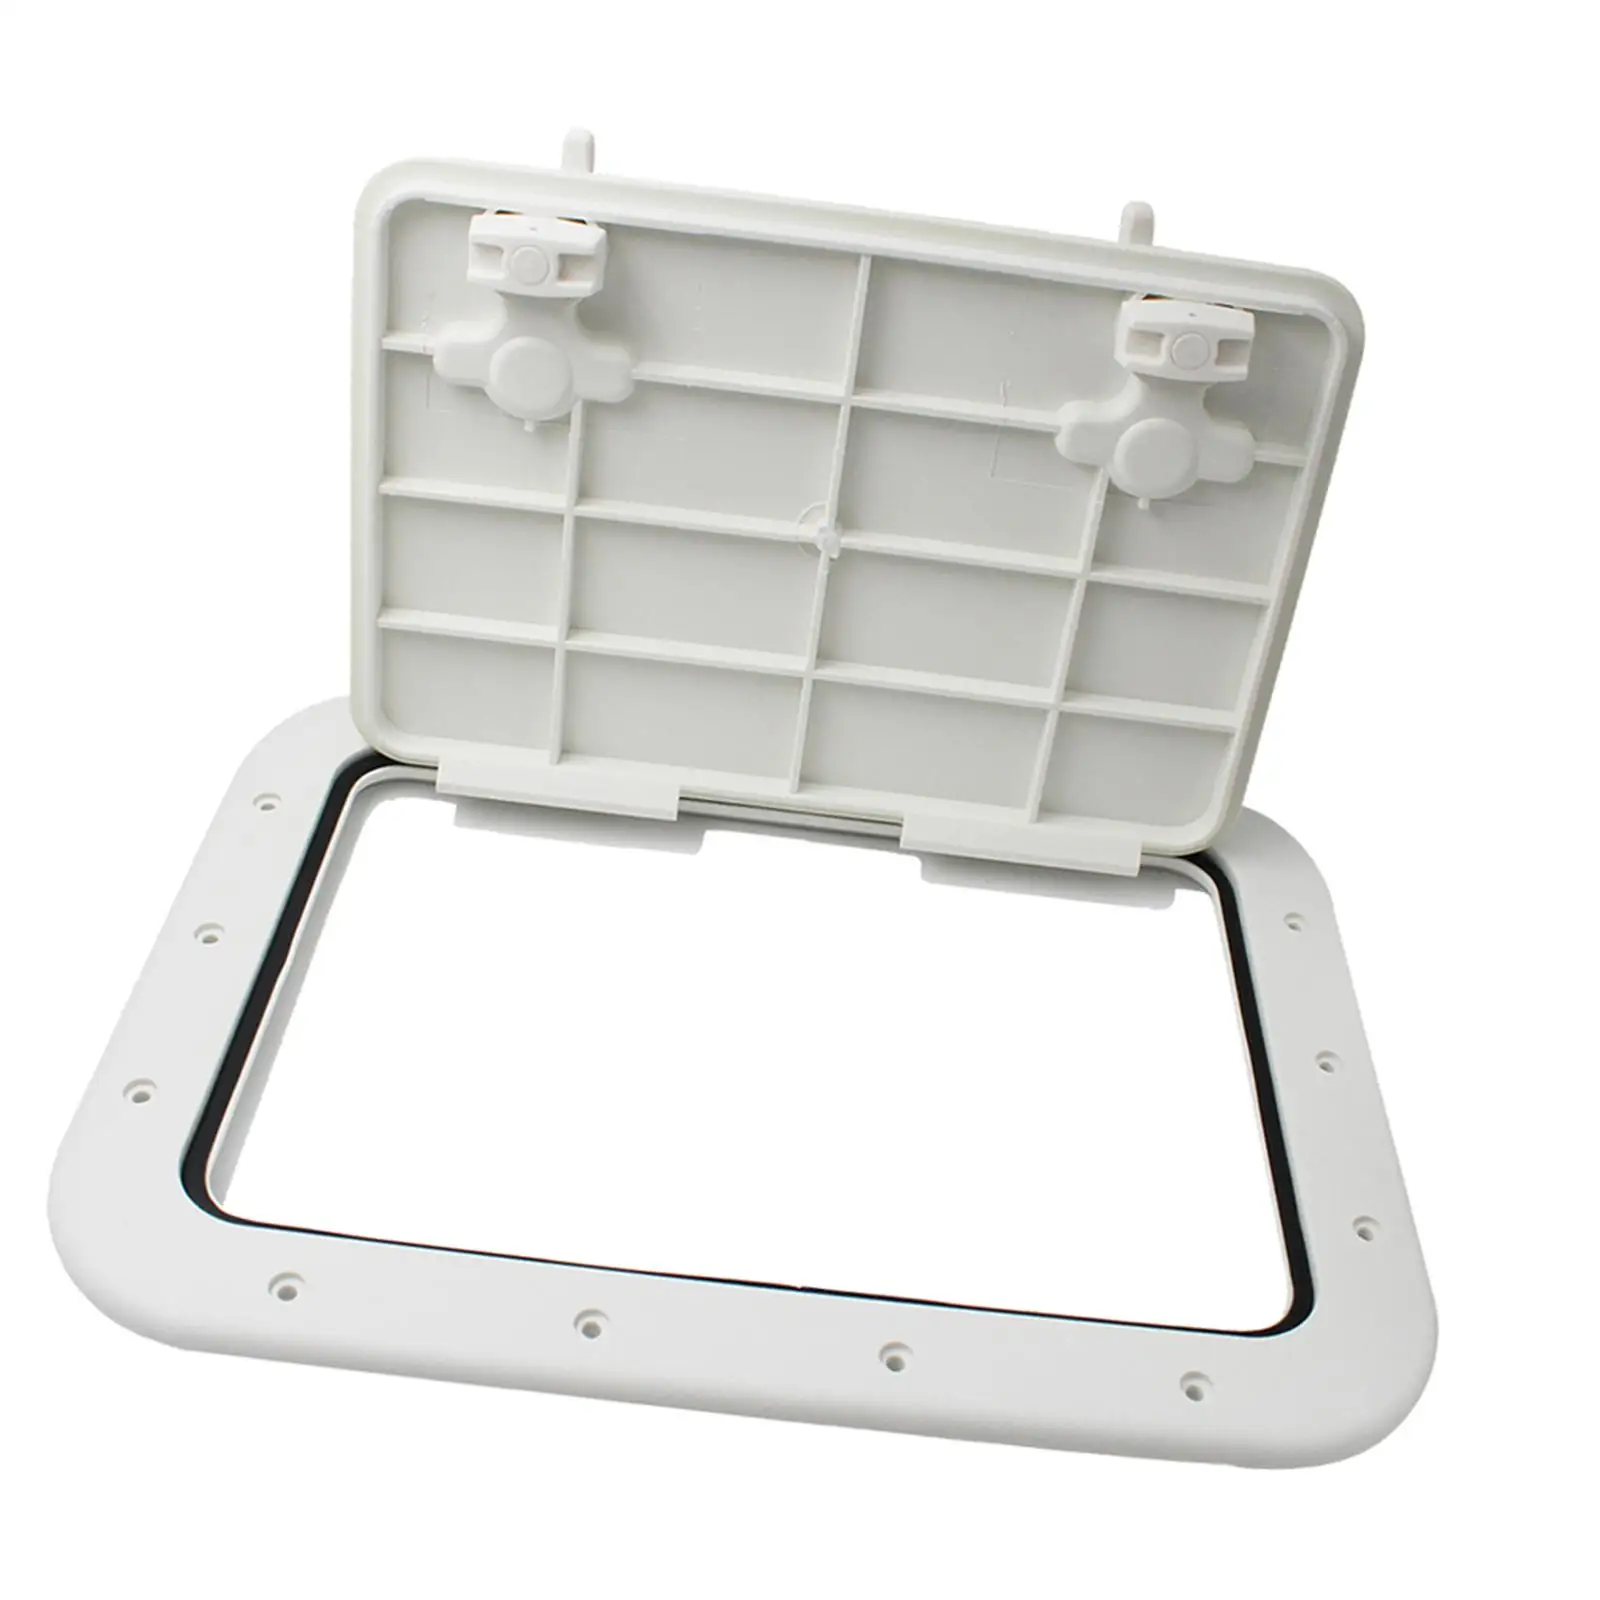 Marine  Access Cover Pull Out w/ Latch for Boat Kayak Canoe, 42.5 x 31.5 x 2cm/16.7 x 12.4 x 0.8 